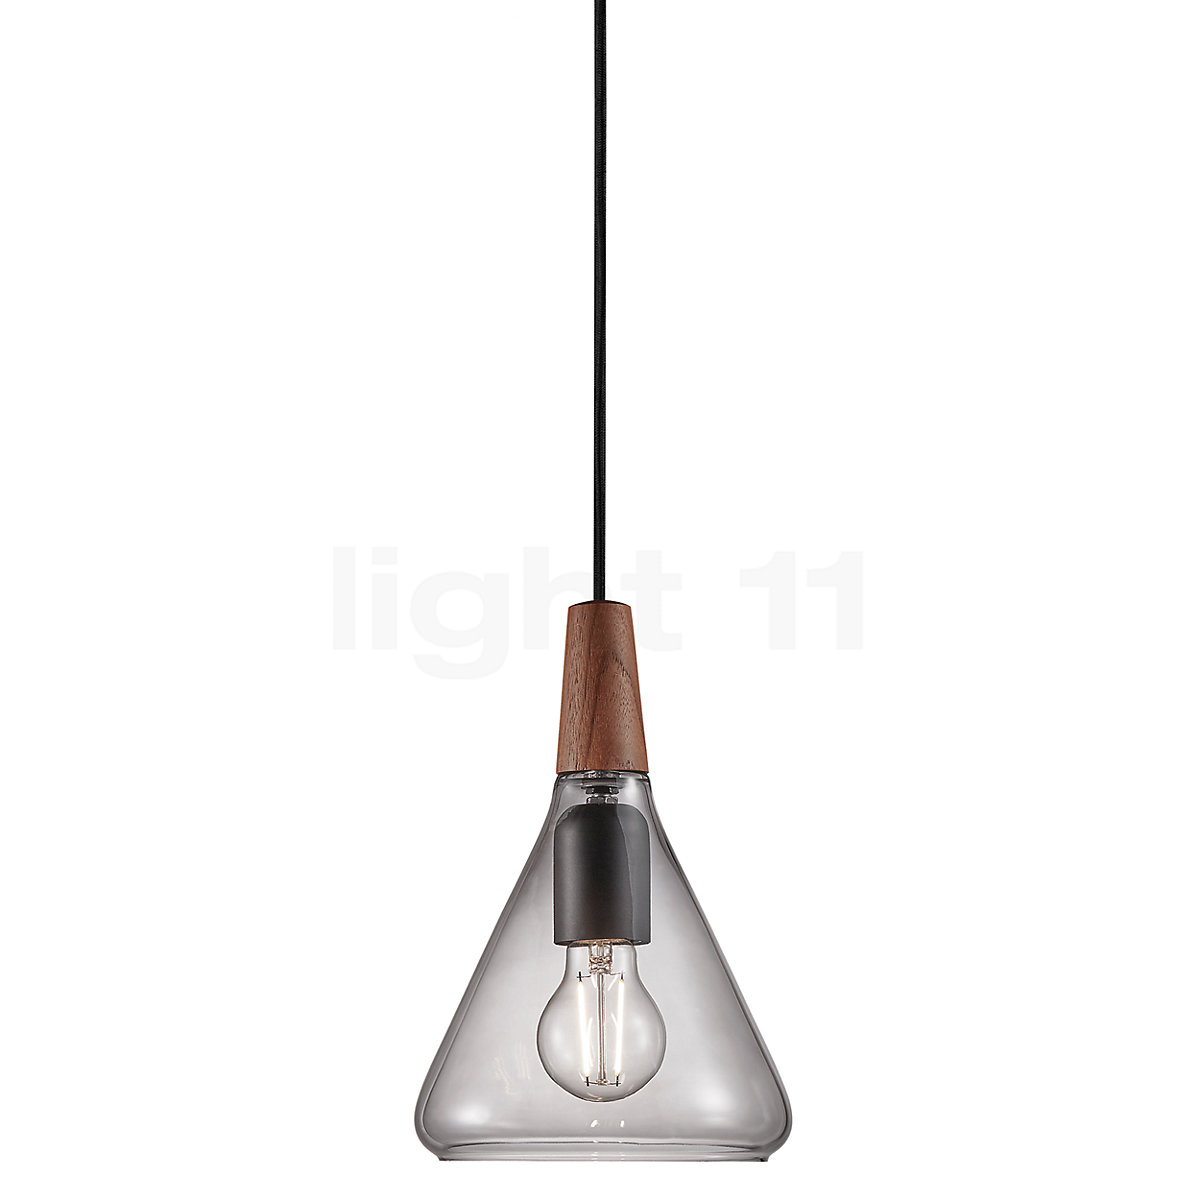 Buy Design for the People Nori Pendant at Light